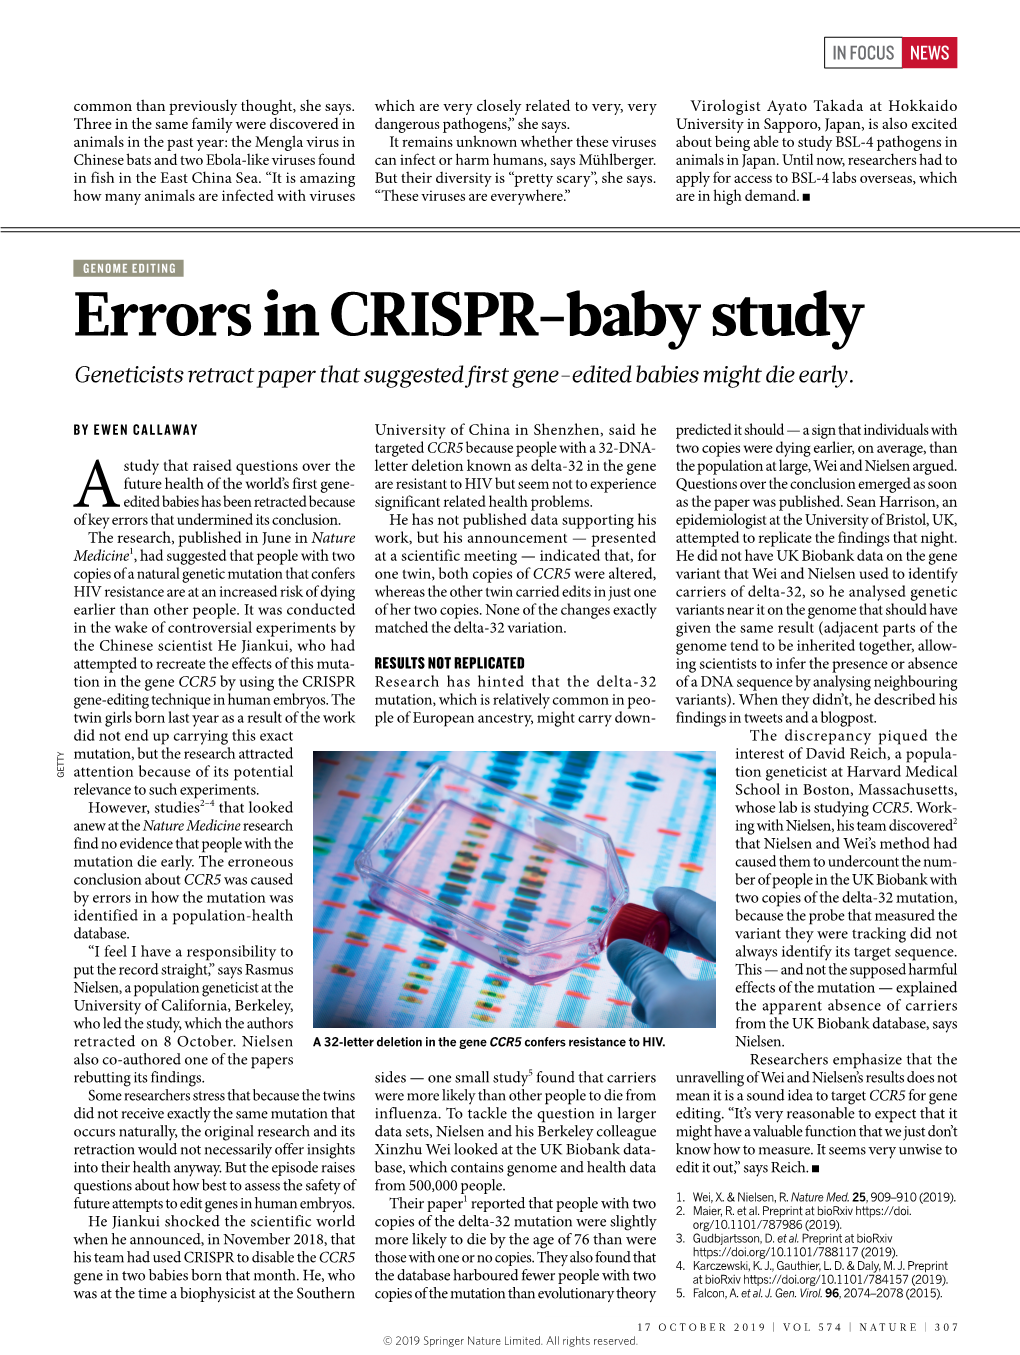 Errors in CRISPR-Baby Study Geneticists Retract Paper That Suggested First Gene-Edited Babies Might Die Early